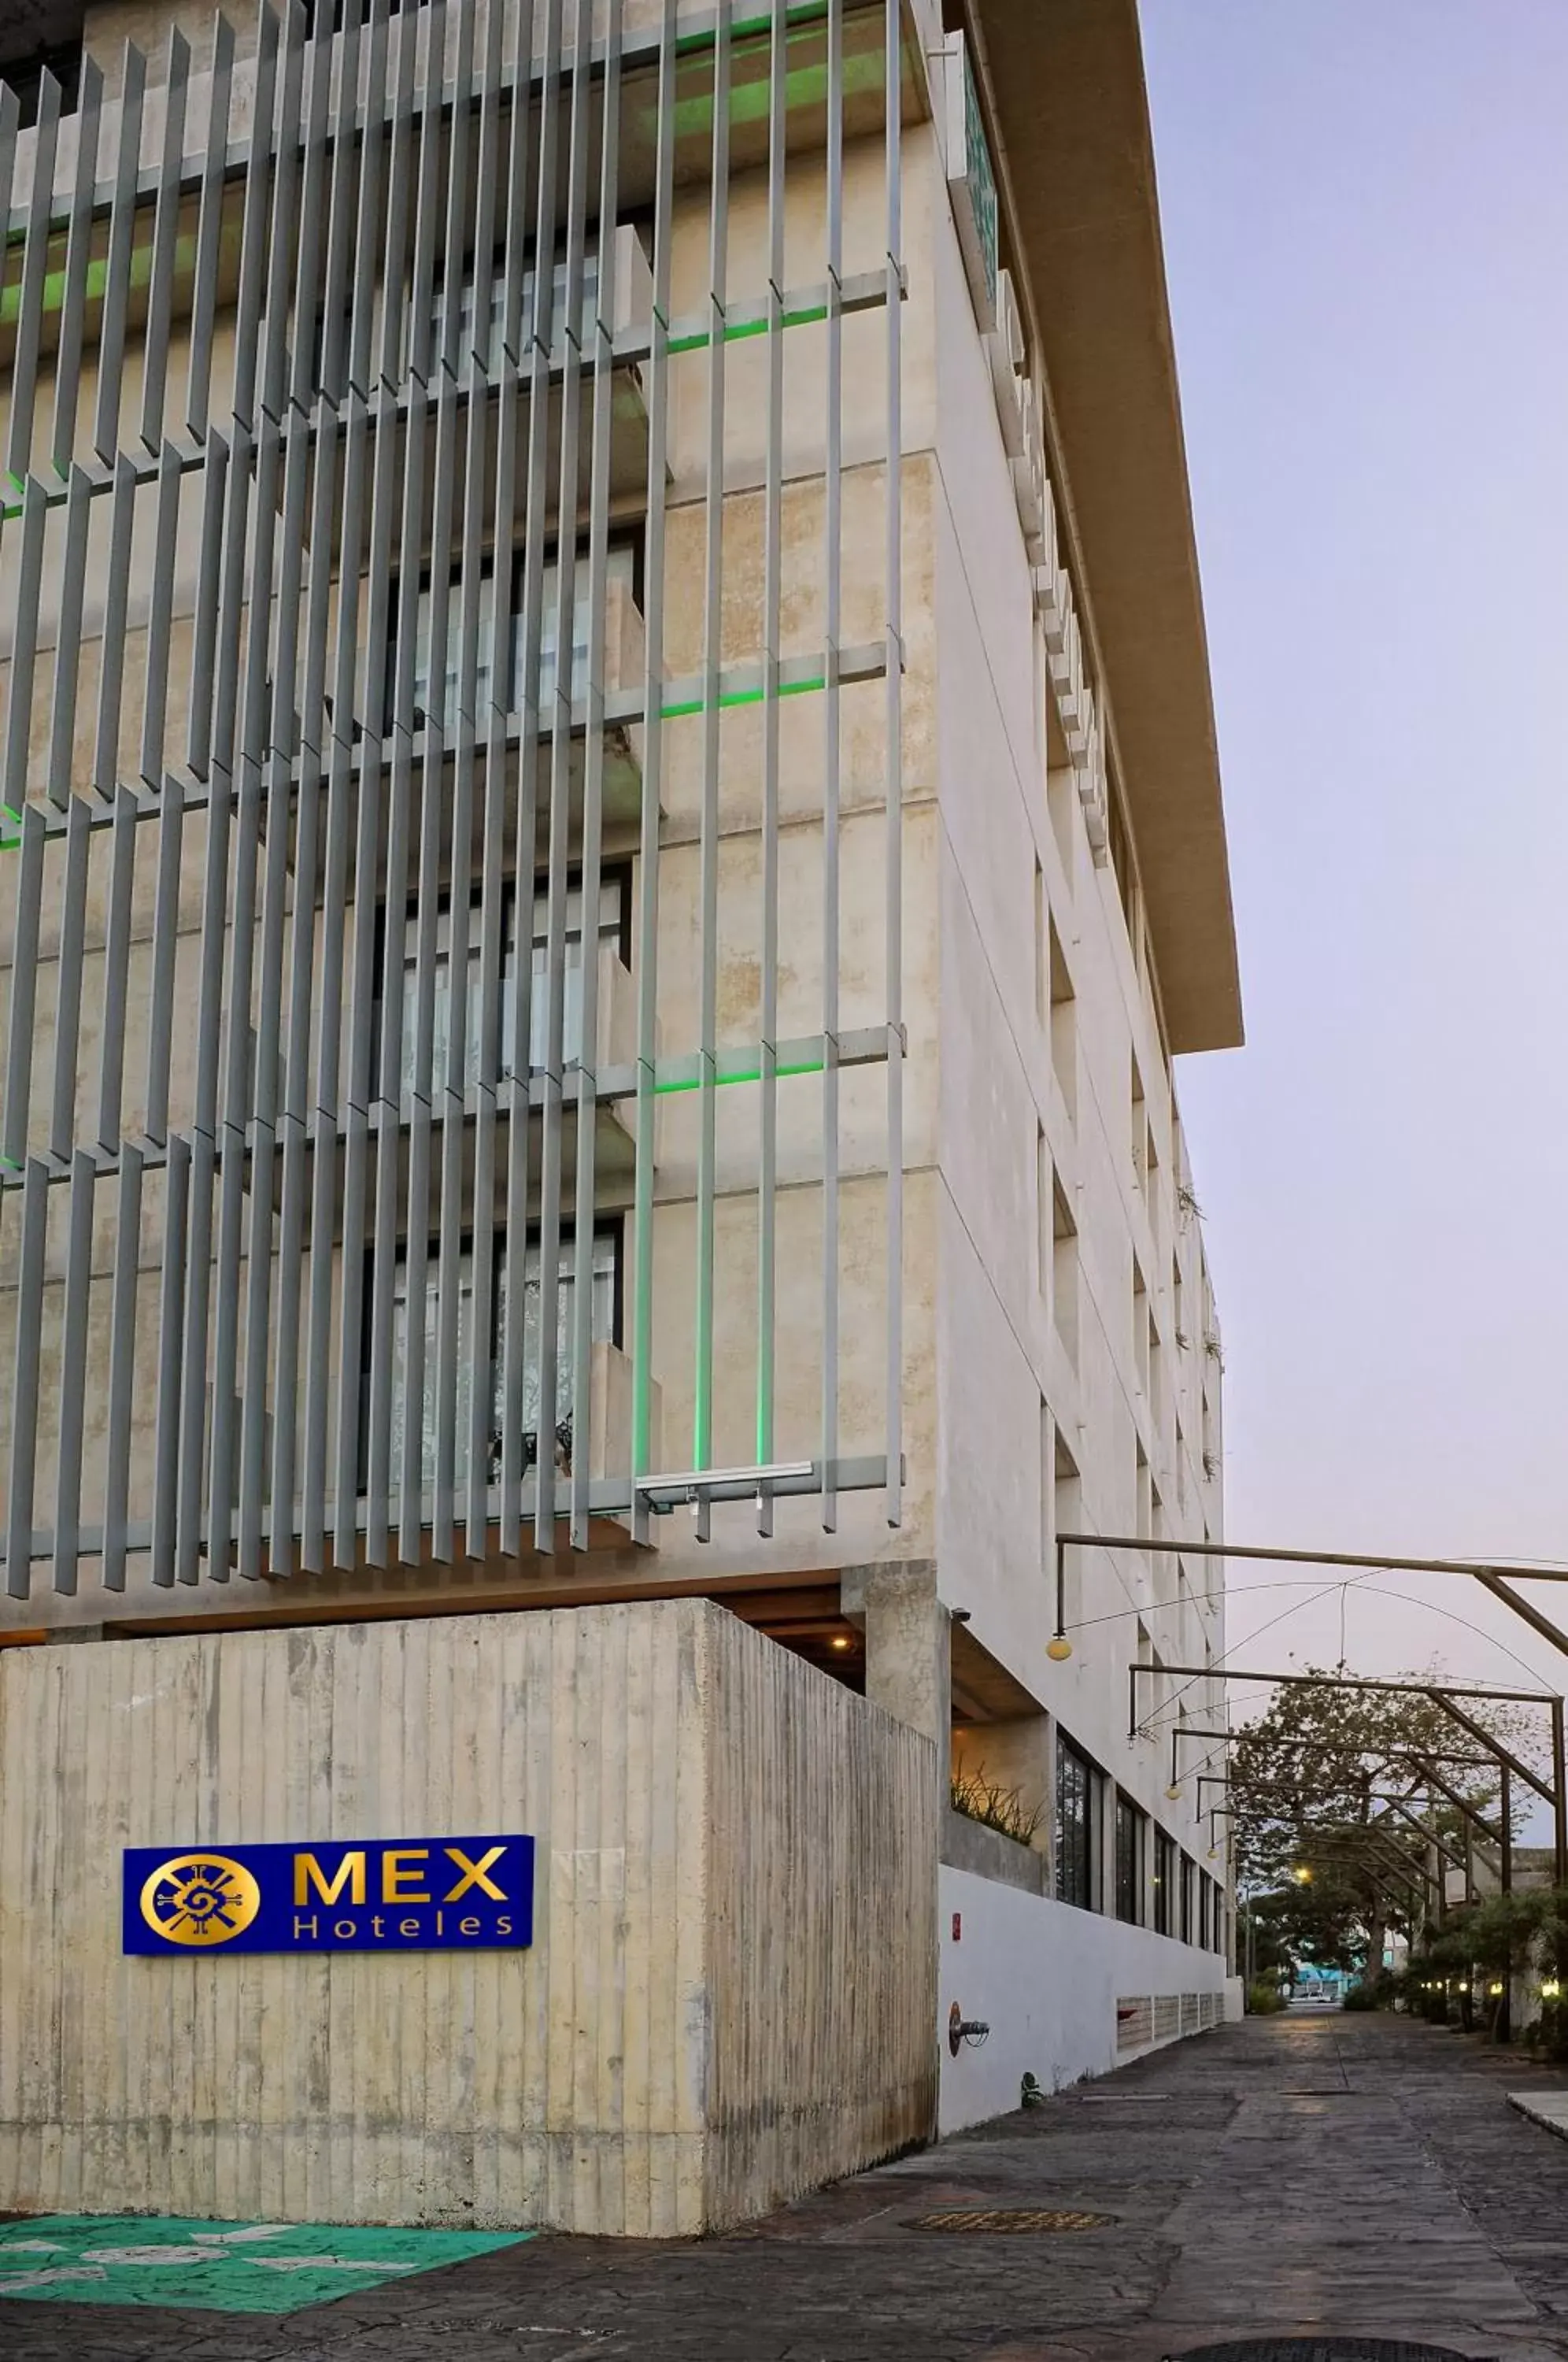 Property Building in Mex Hoteles